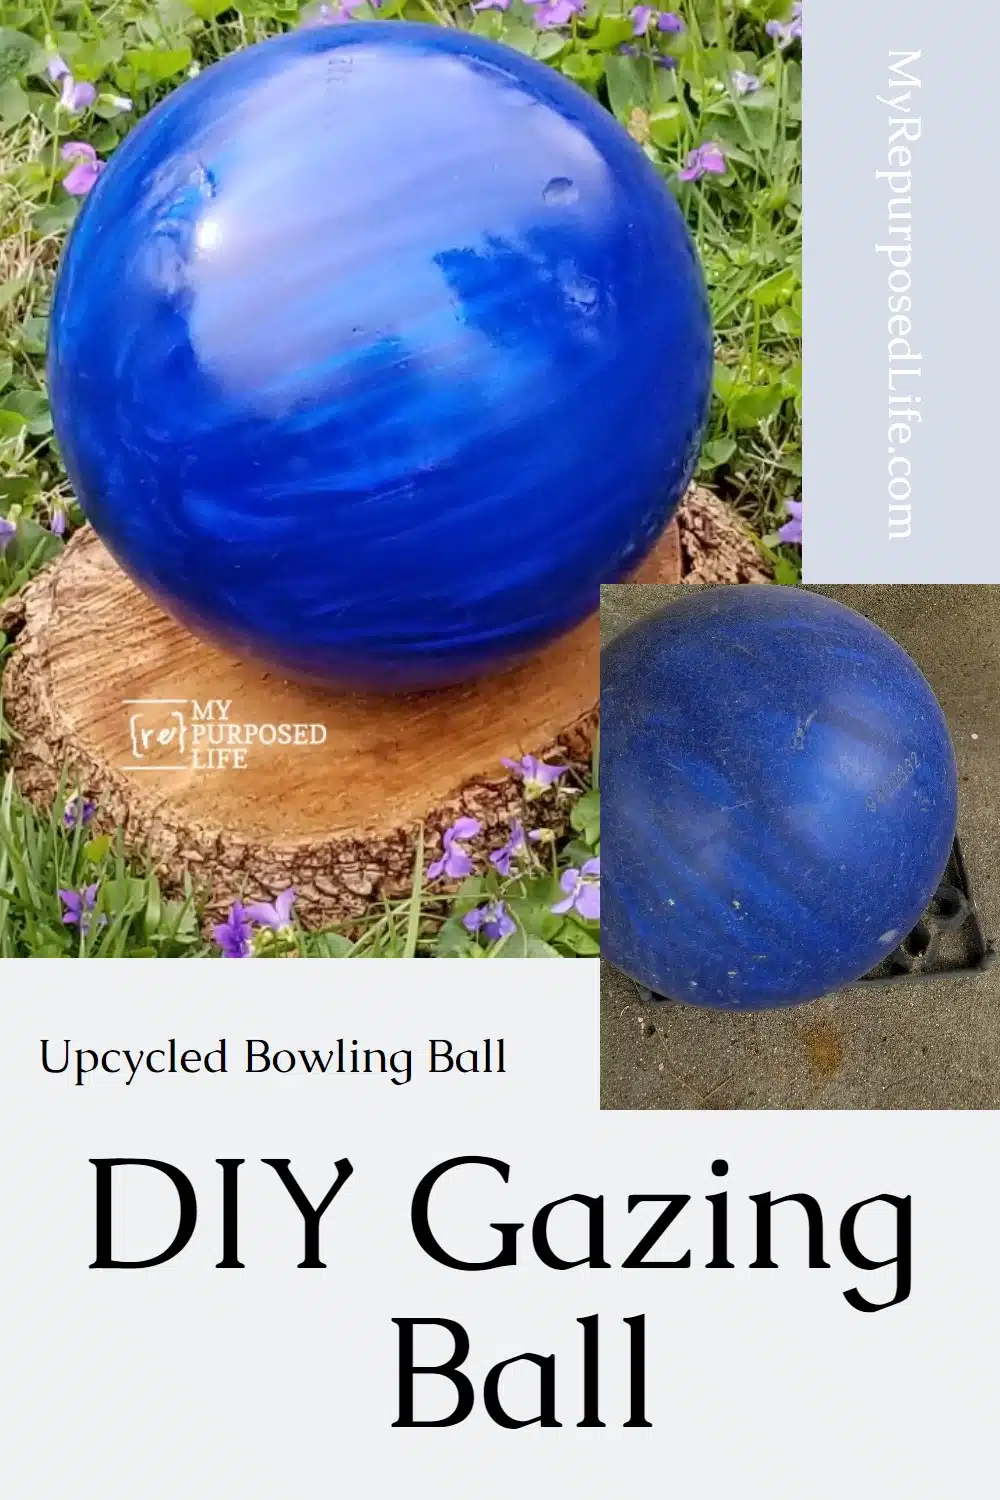 How to make a diy gazing ball using an old bowling ball. Maybe you have one in the closet? Bring it out, shine it up and put it in your garden! #MyRepurposedLife #repurposed #upcycle #bowlingball #garden #diy #gazingball via @repurposedlife